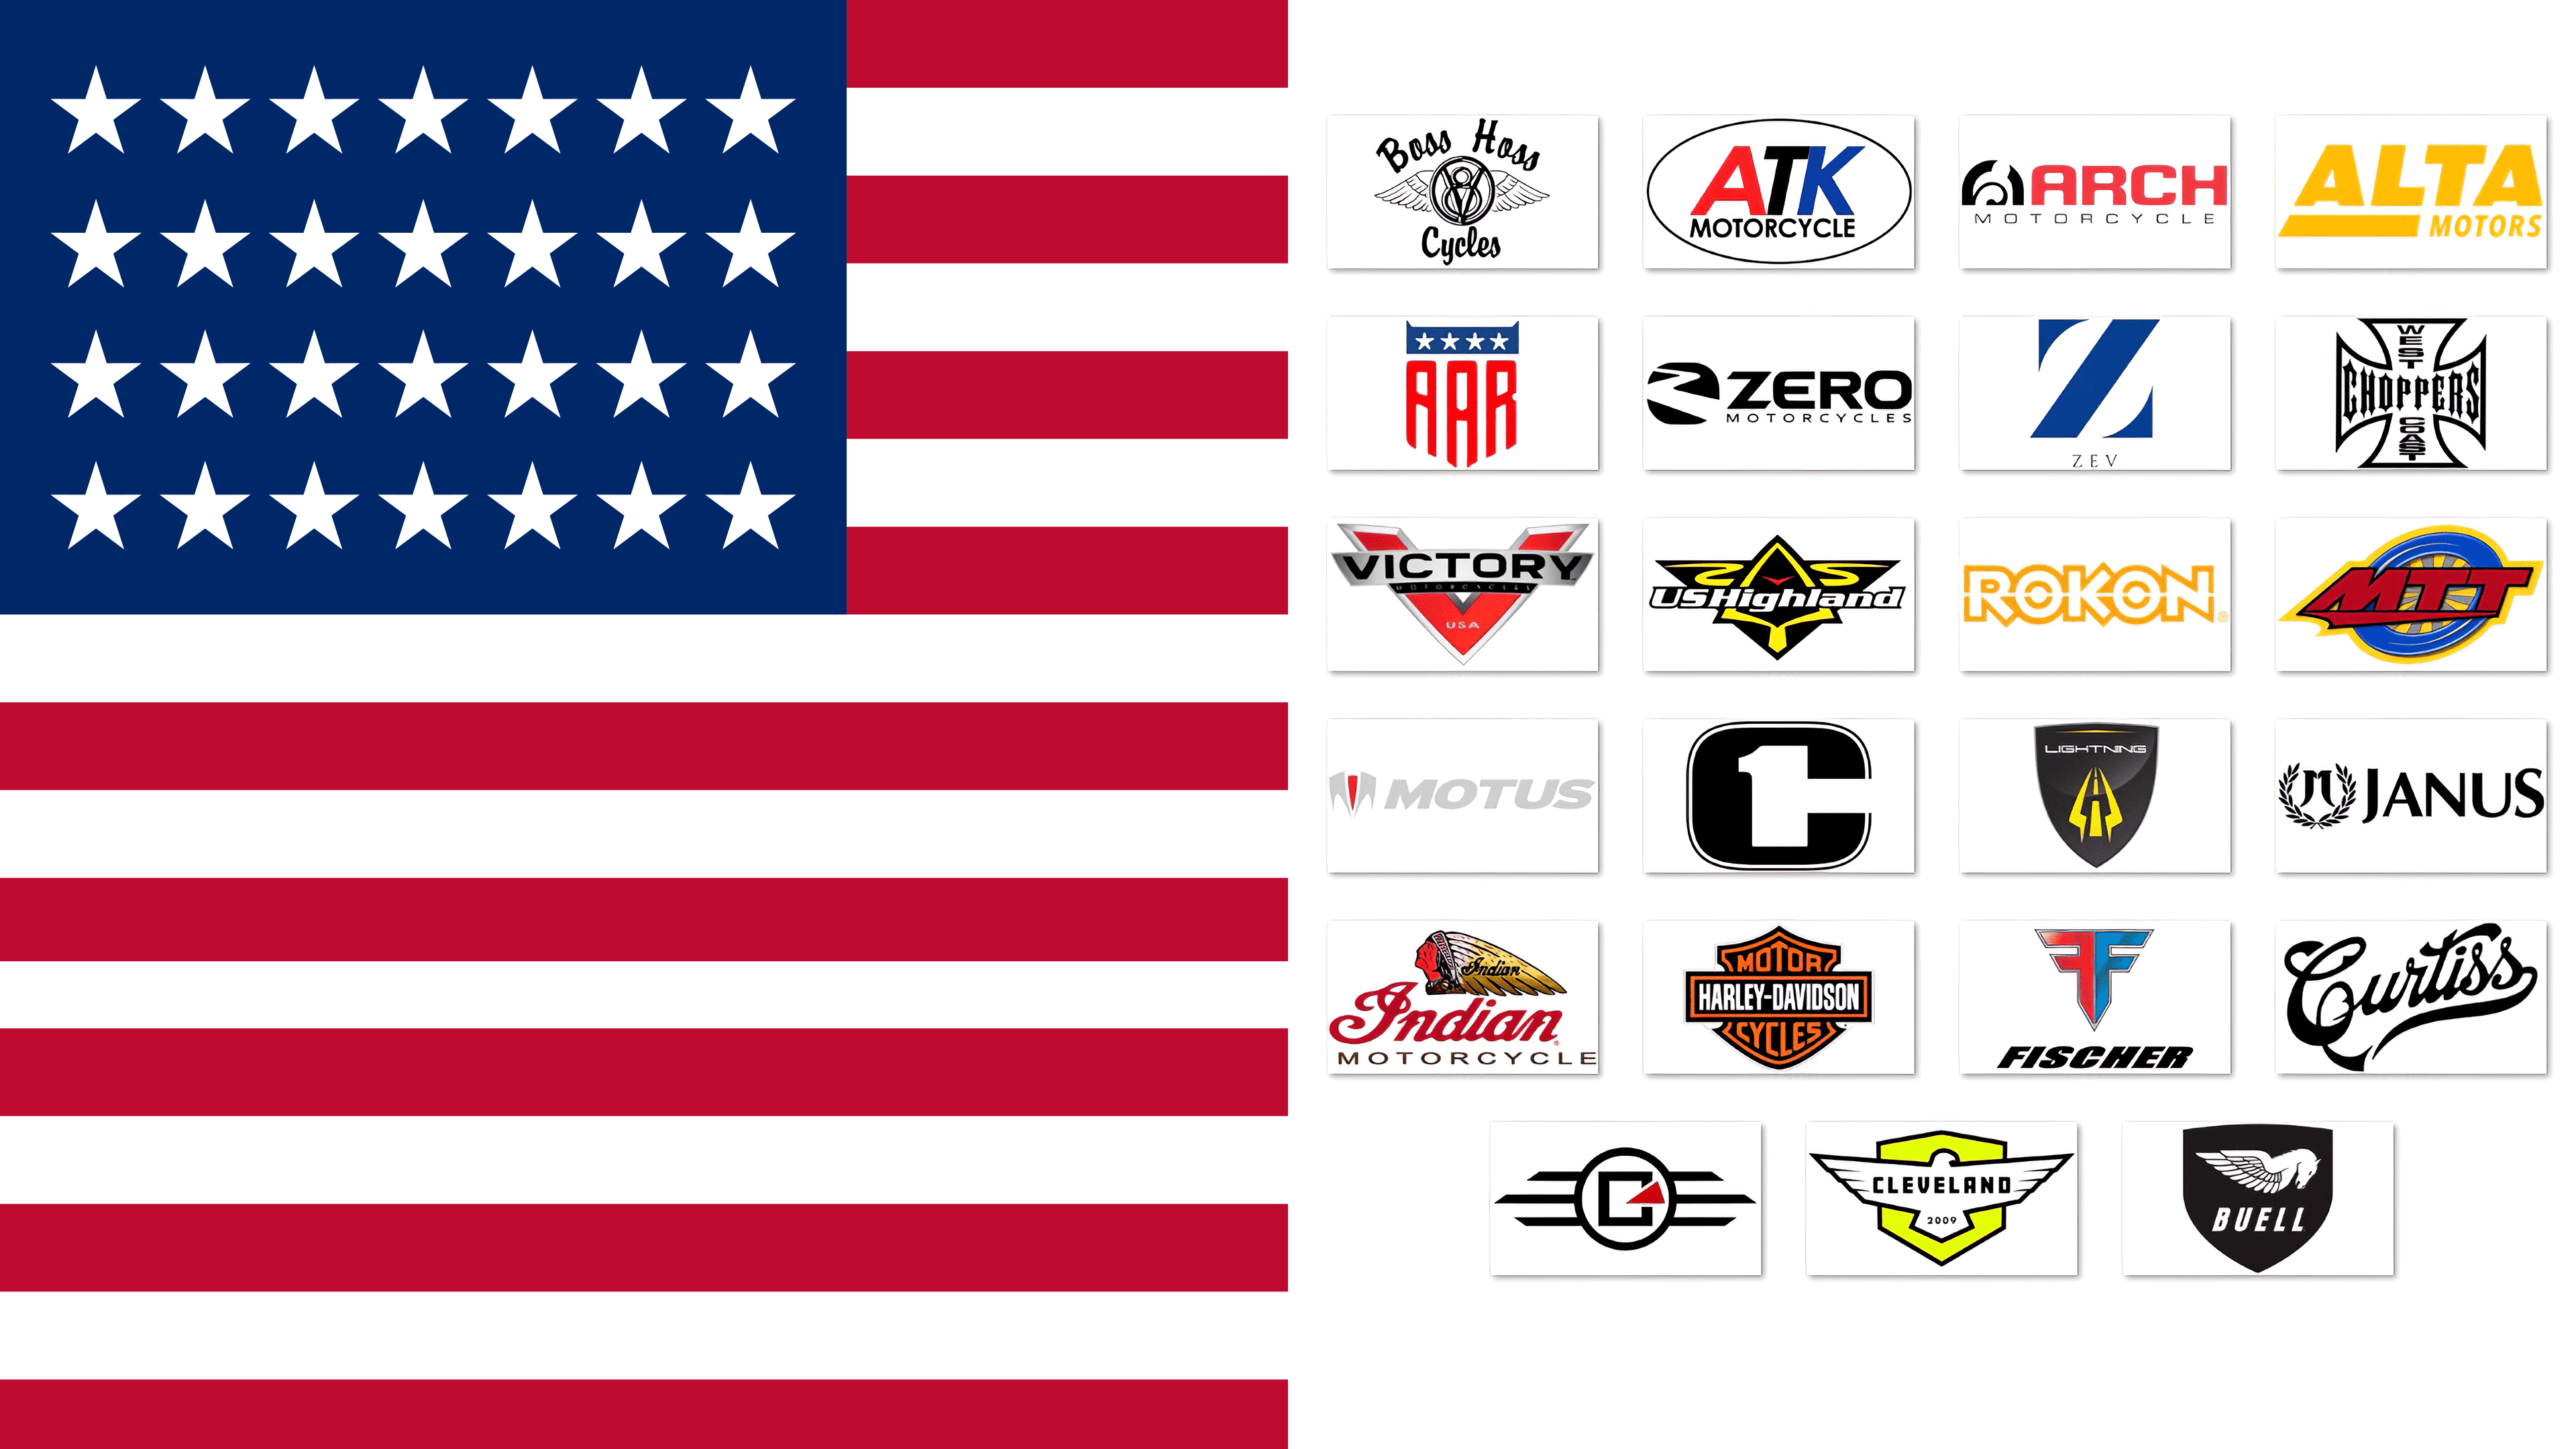 Motorcycles USA Brands 